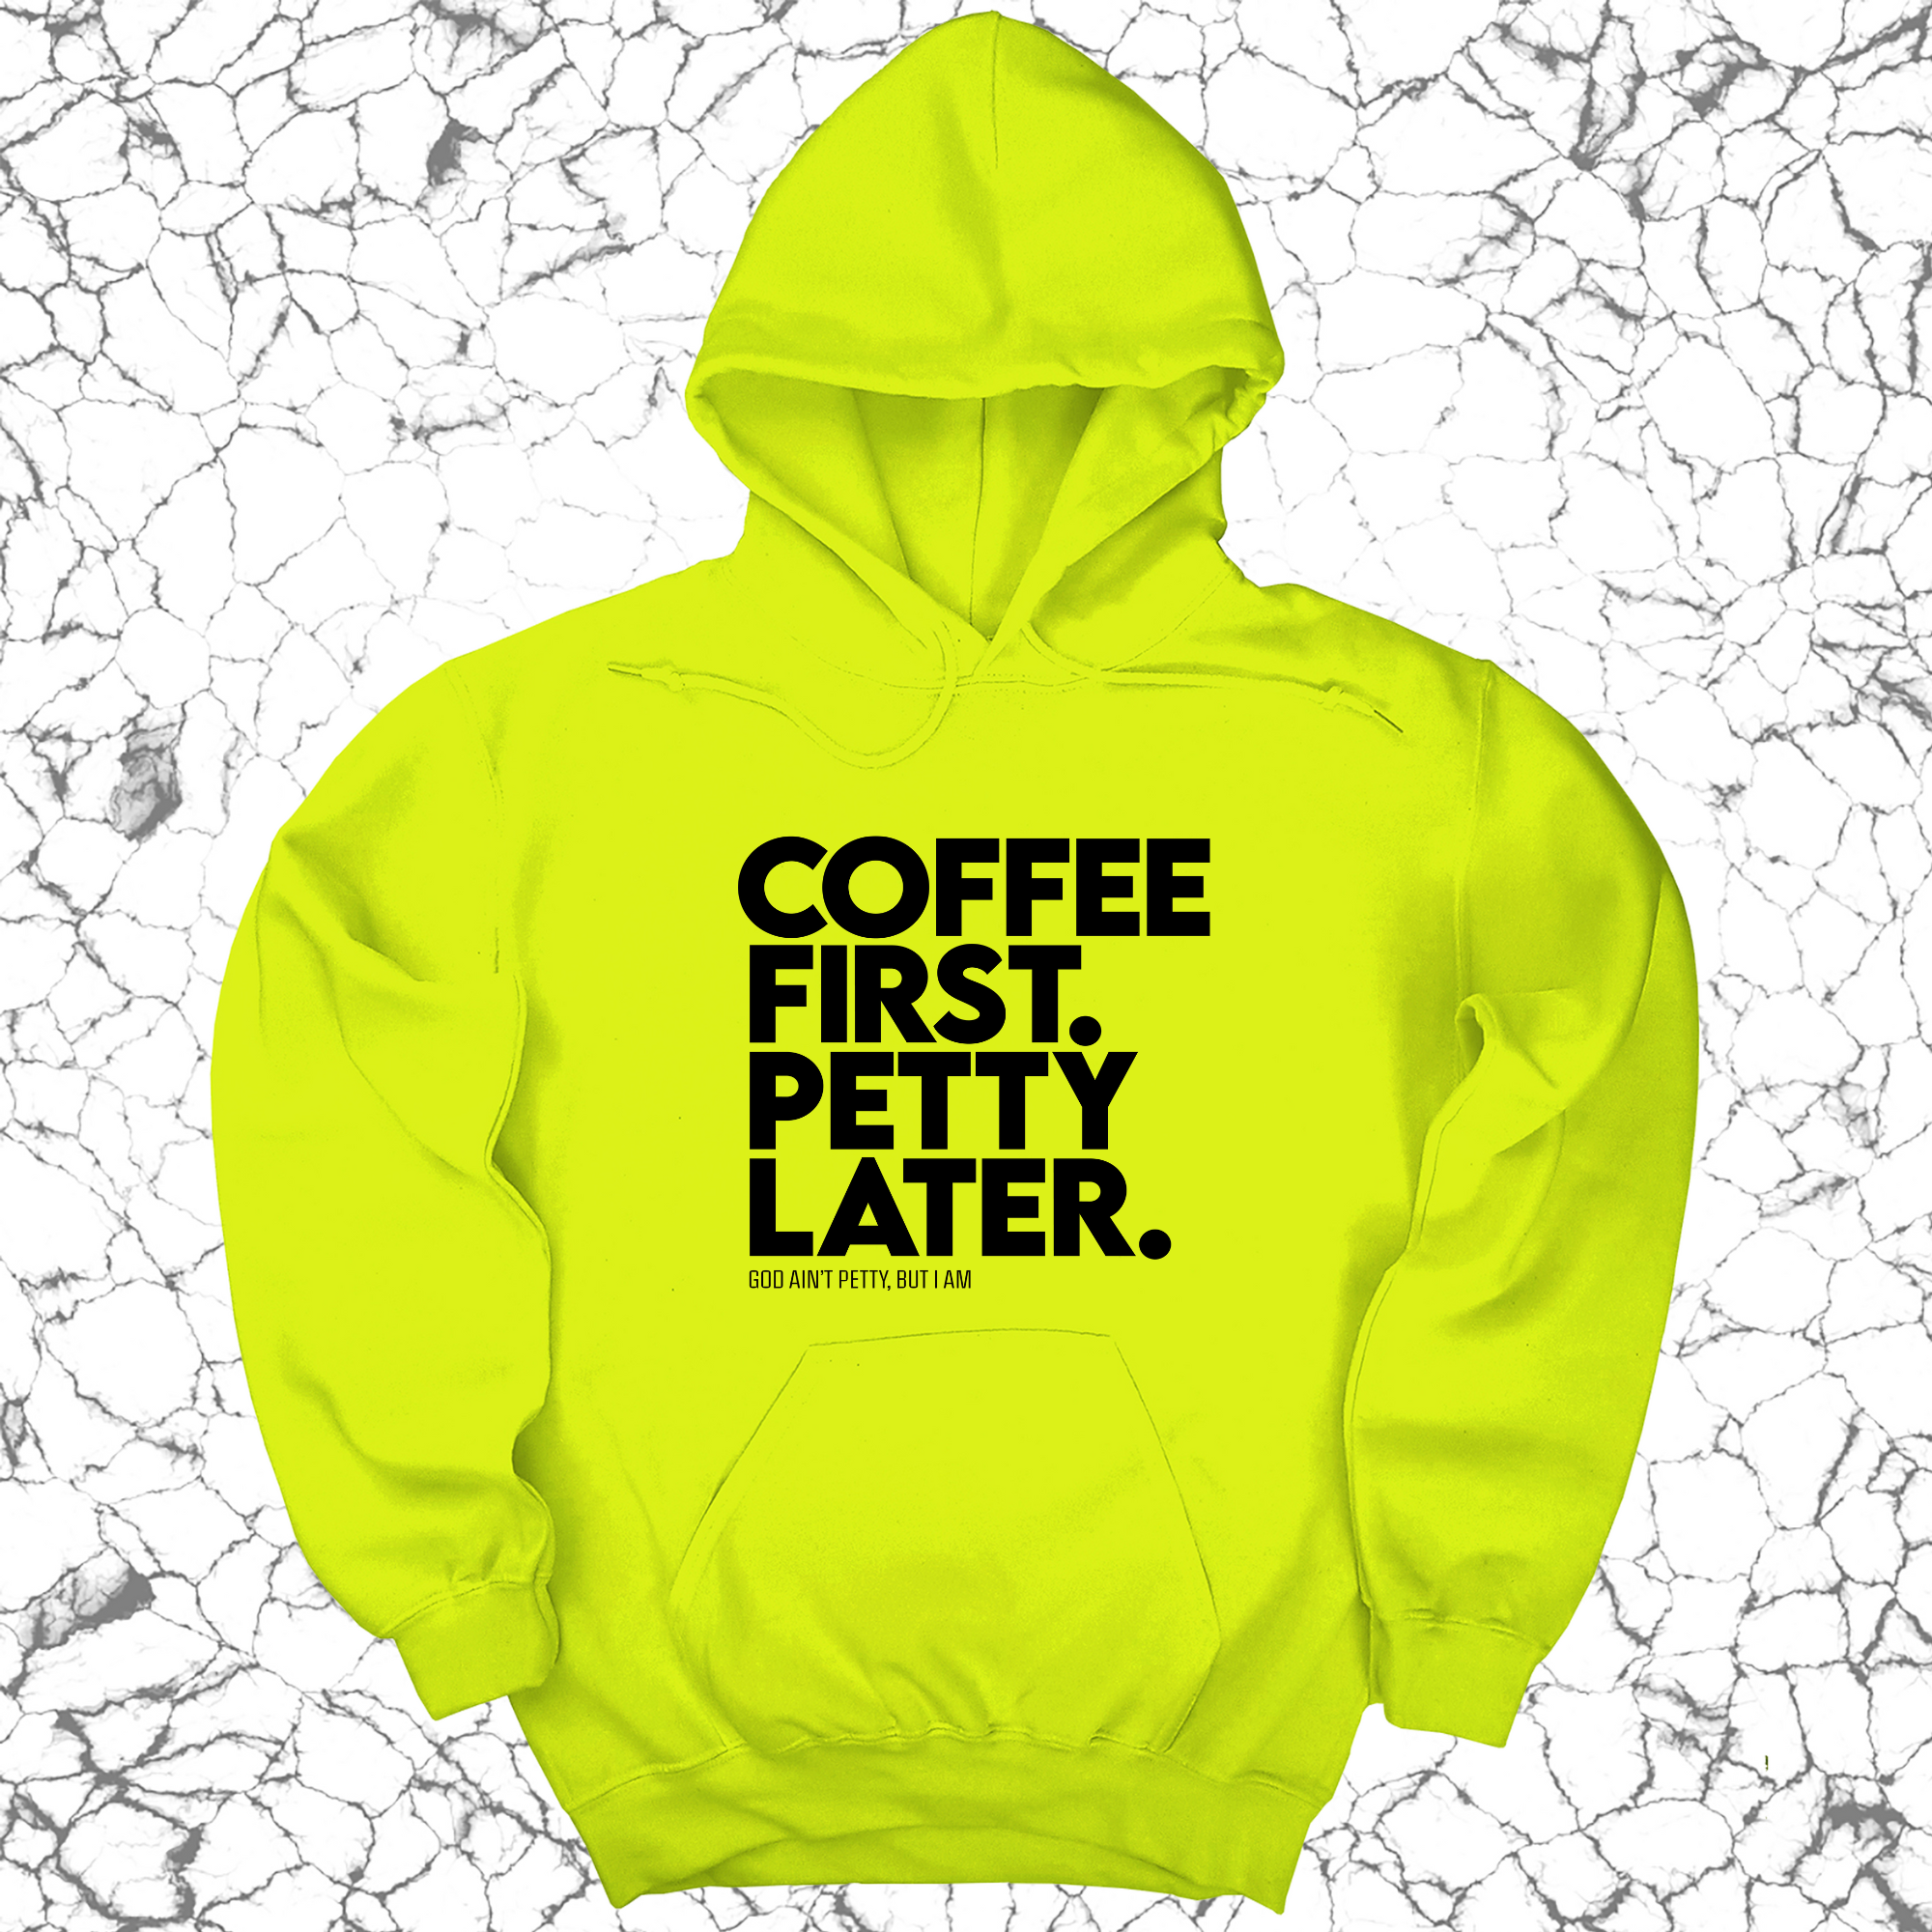 Coffee First Petty Later Unisex Hoodie-Hoodie-The Original God Ain't Petty But I Am